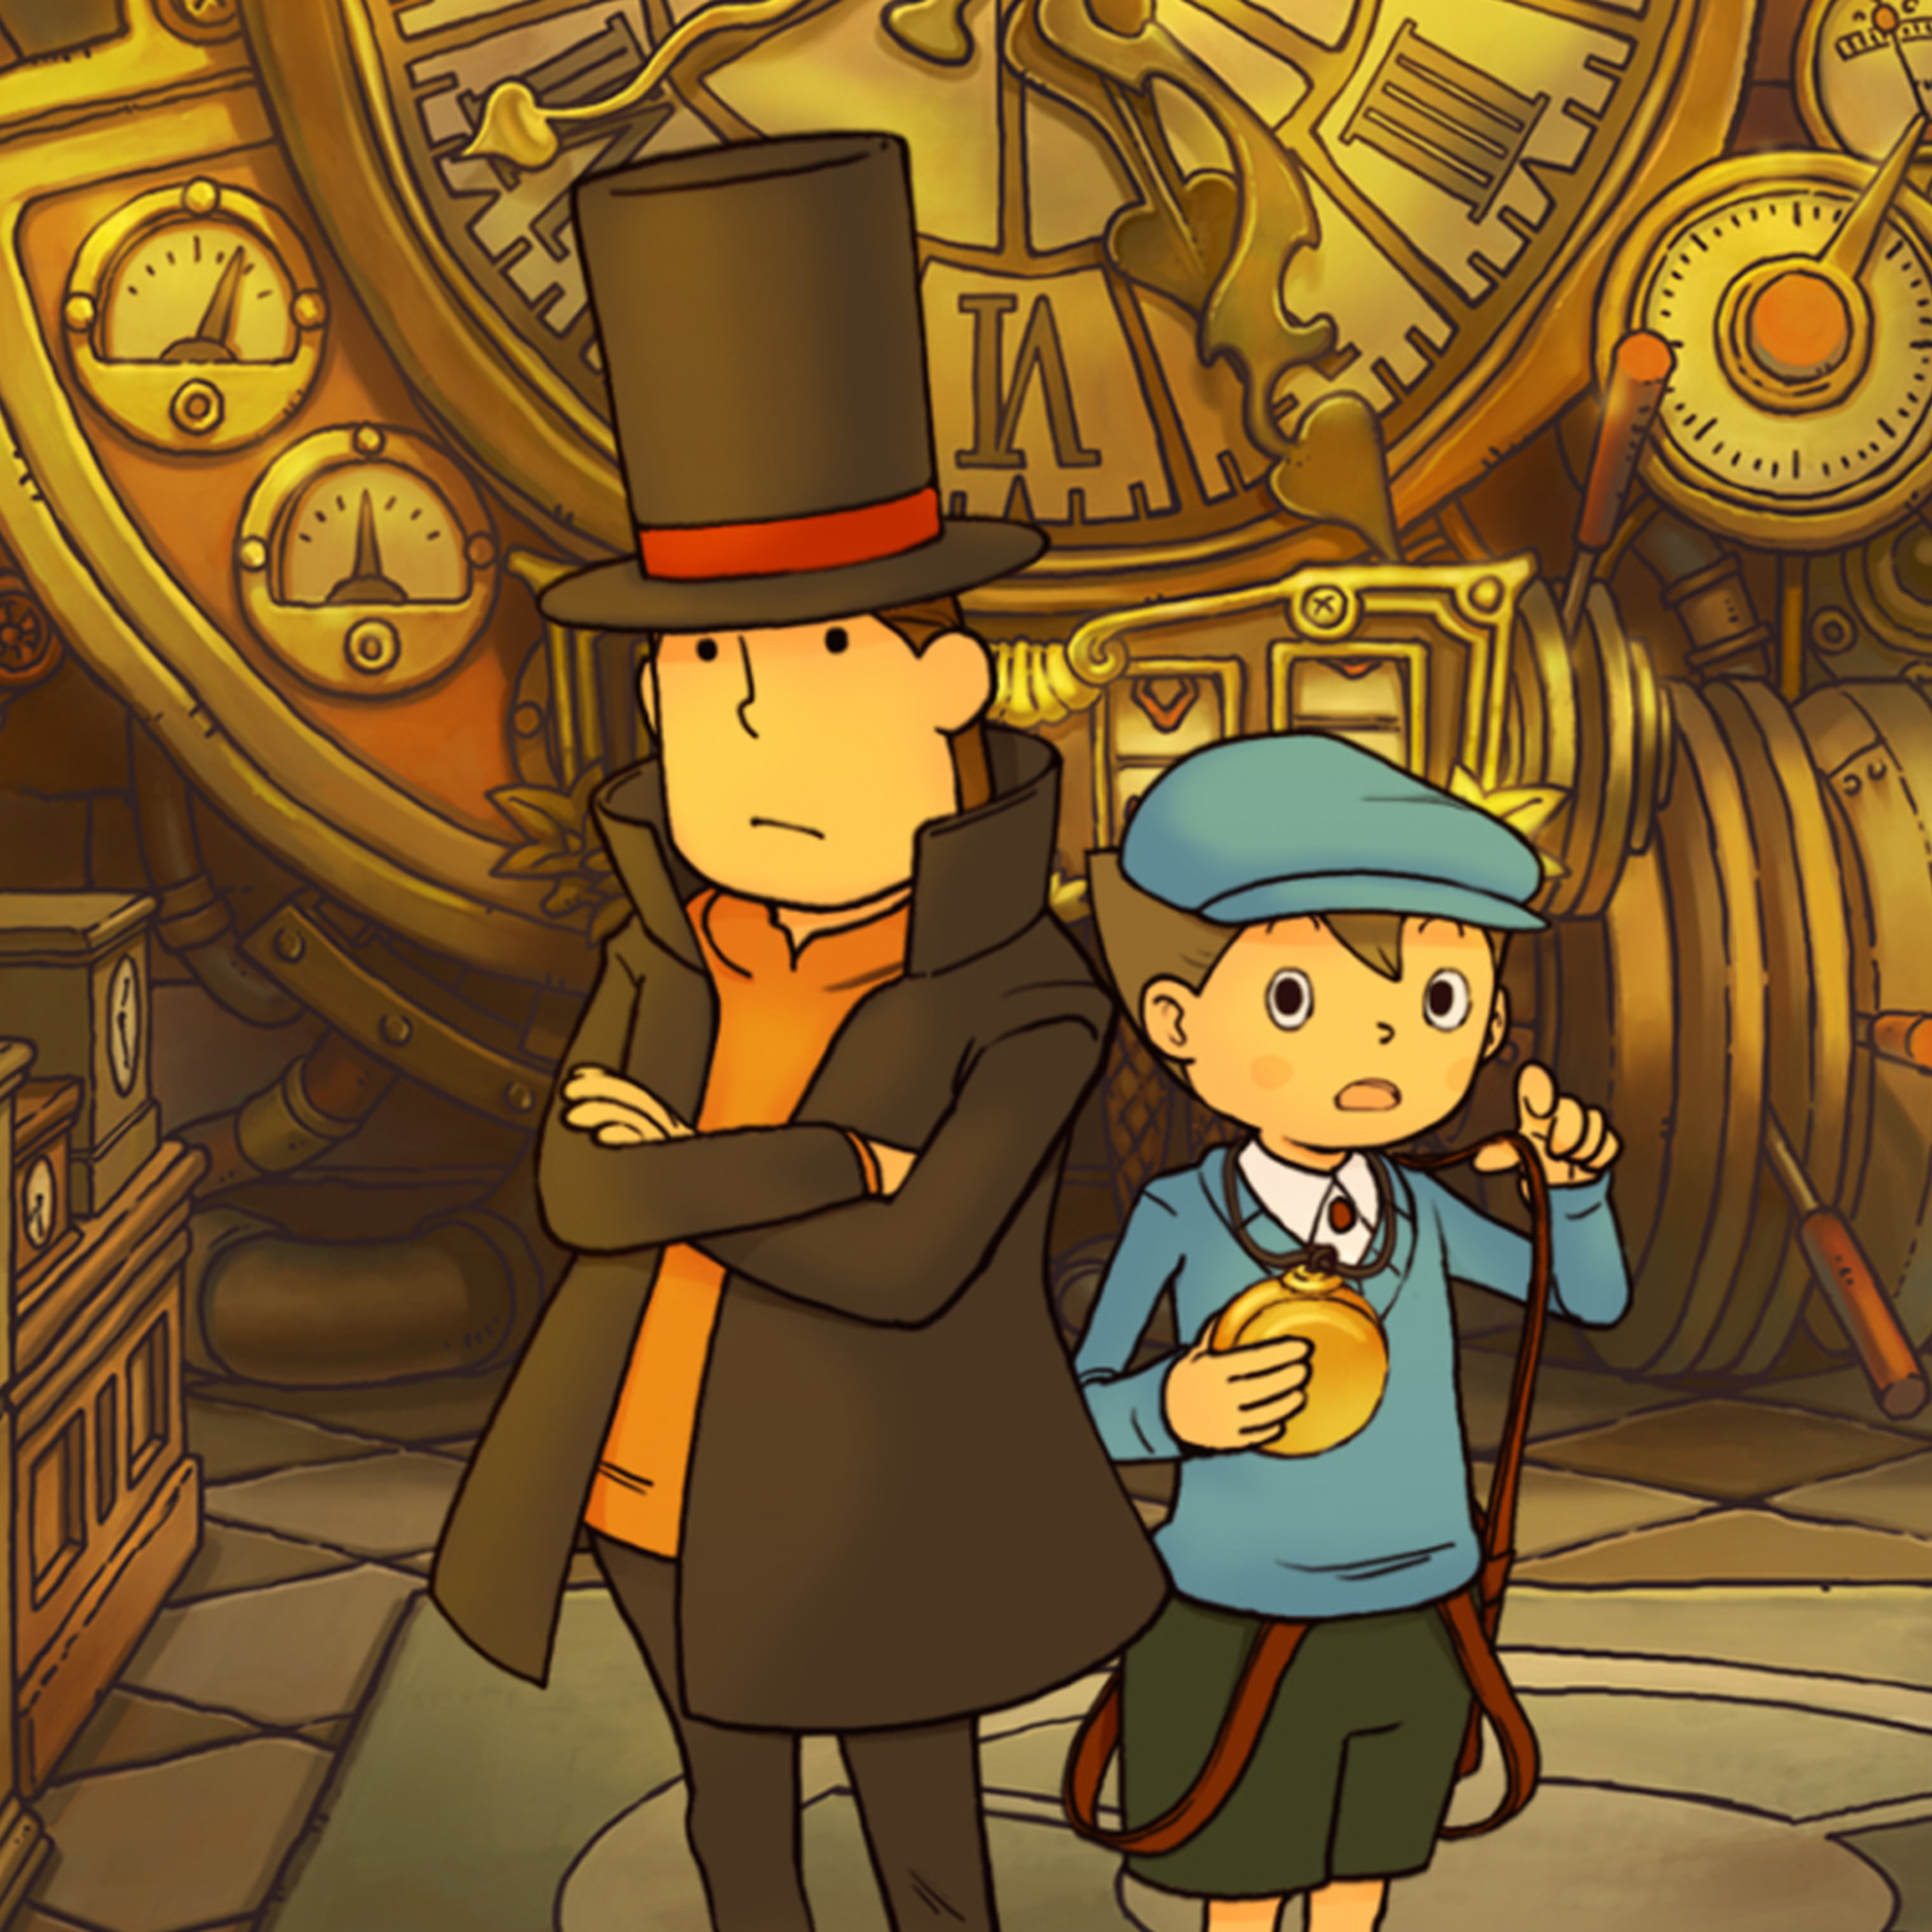 345: Professor Layton and the Curious Village